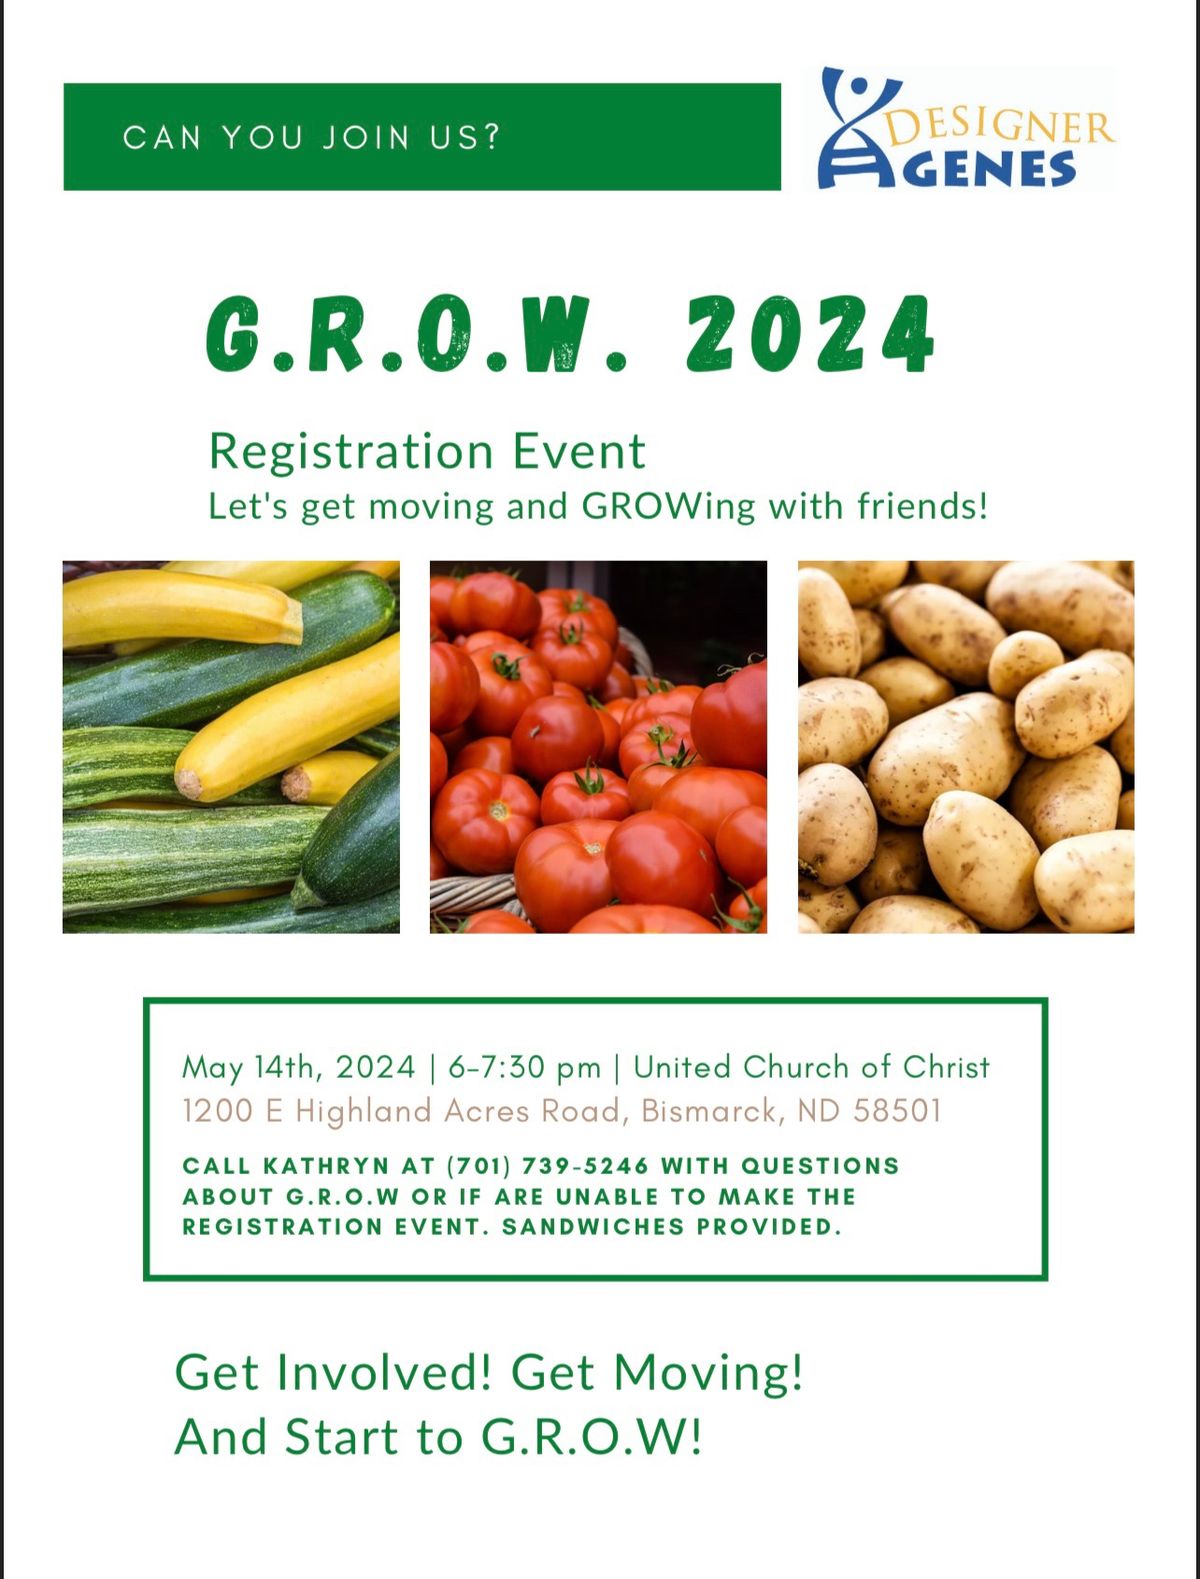 G.R.O.W. 2024 (Gardening Recreational Opportunity With Friends)